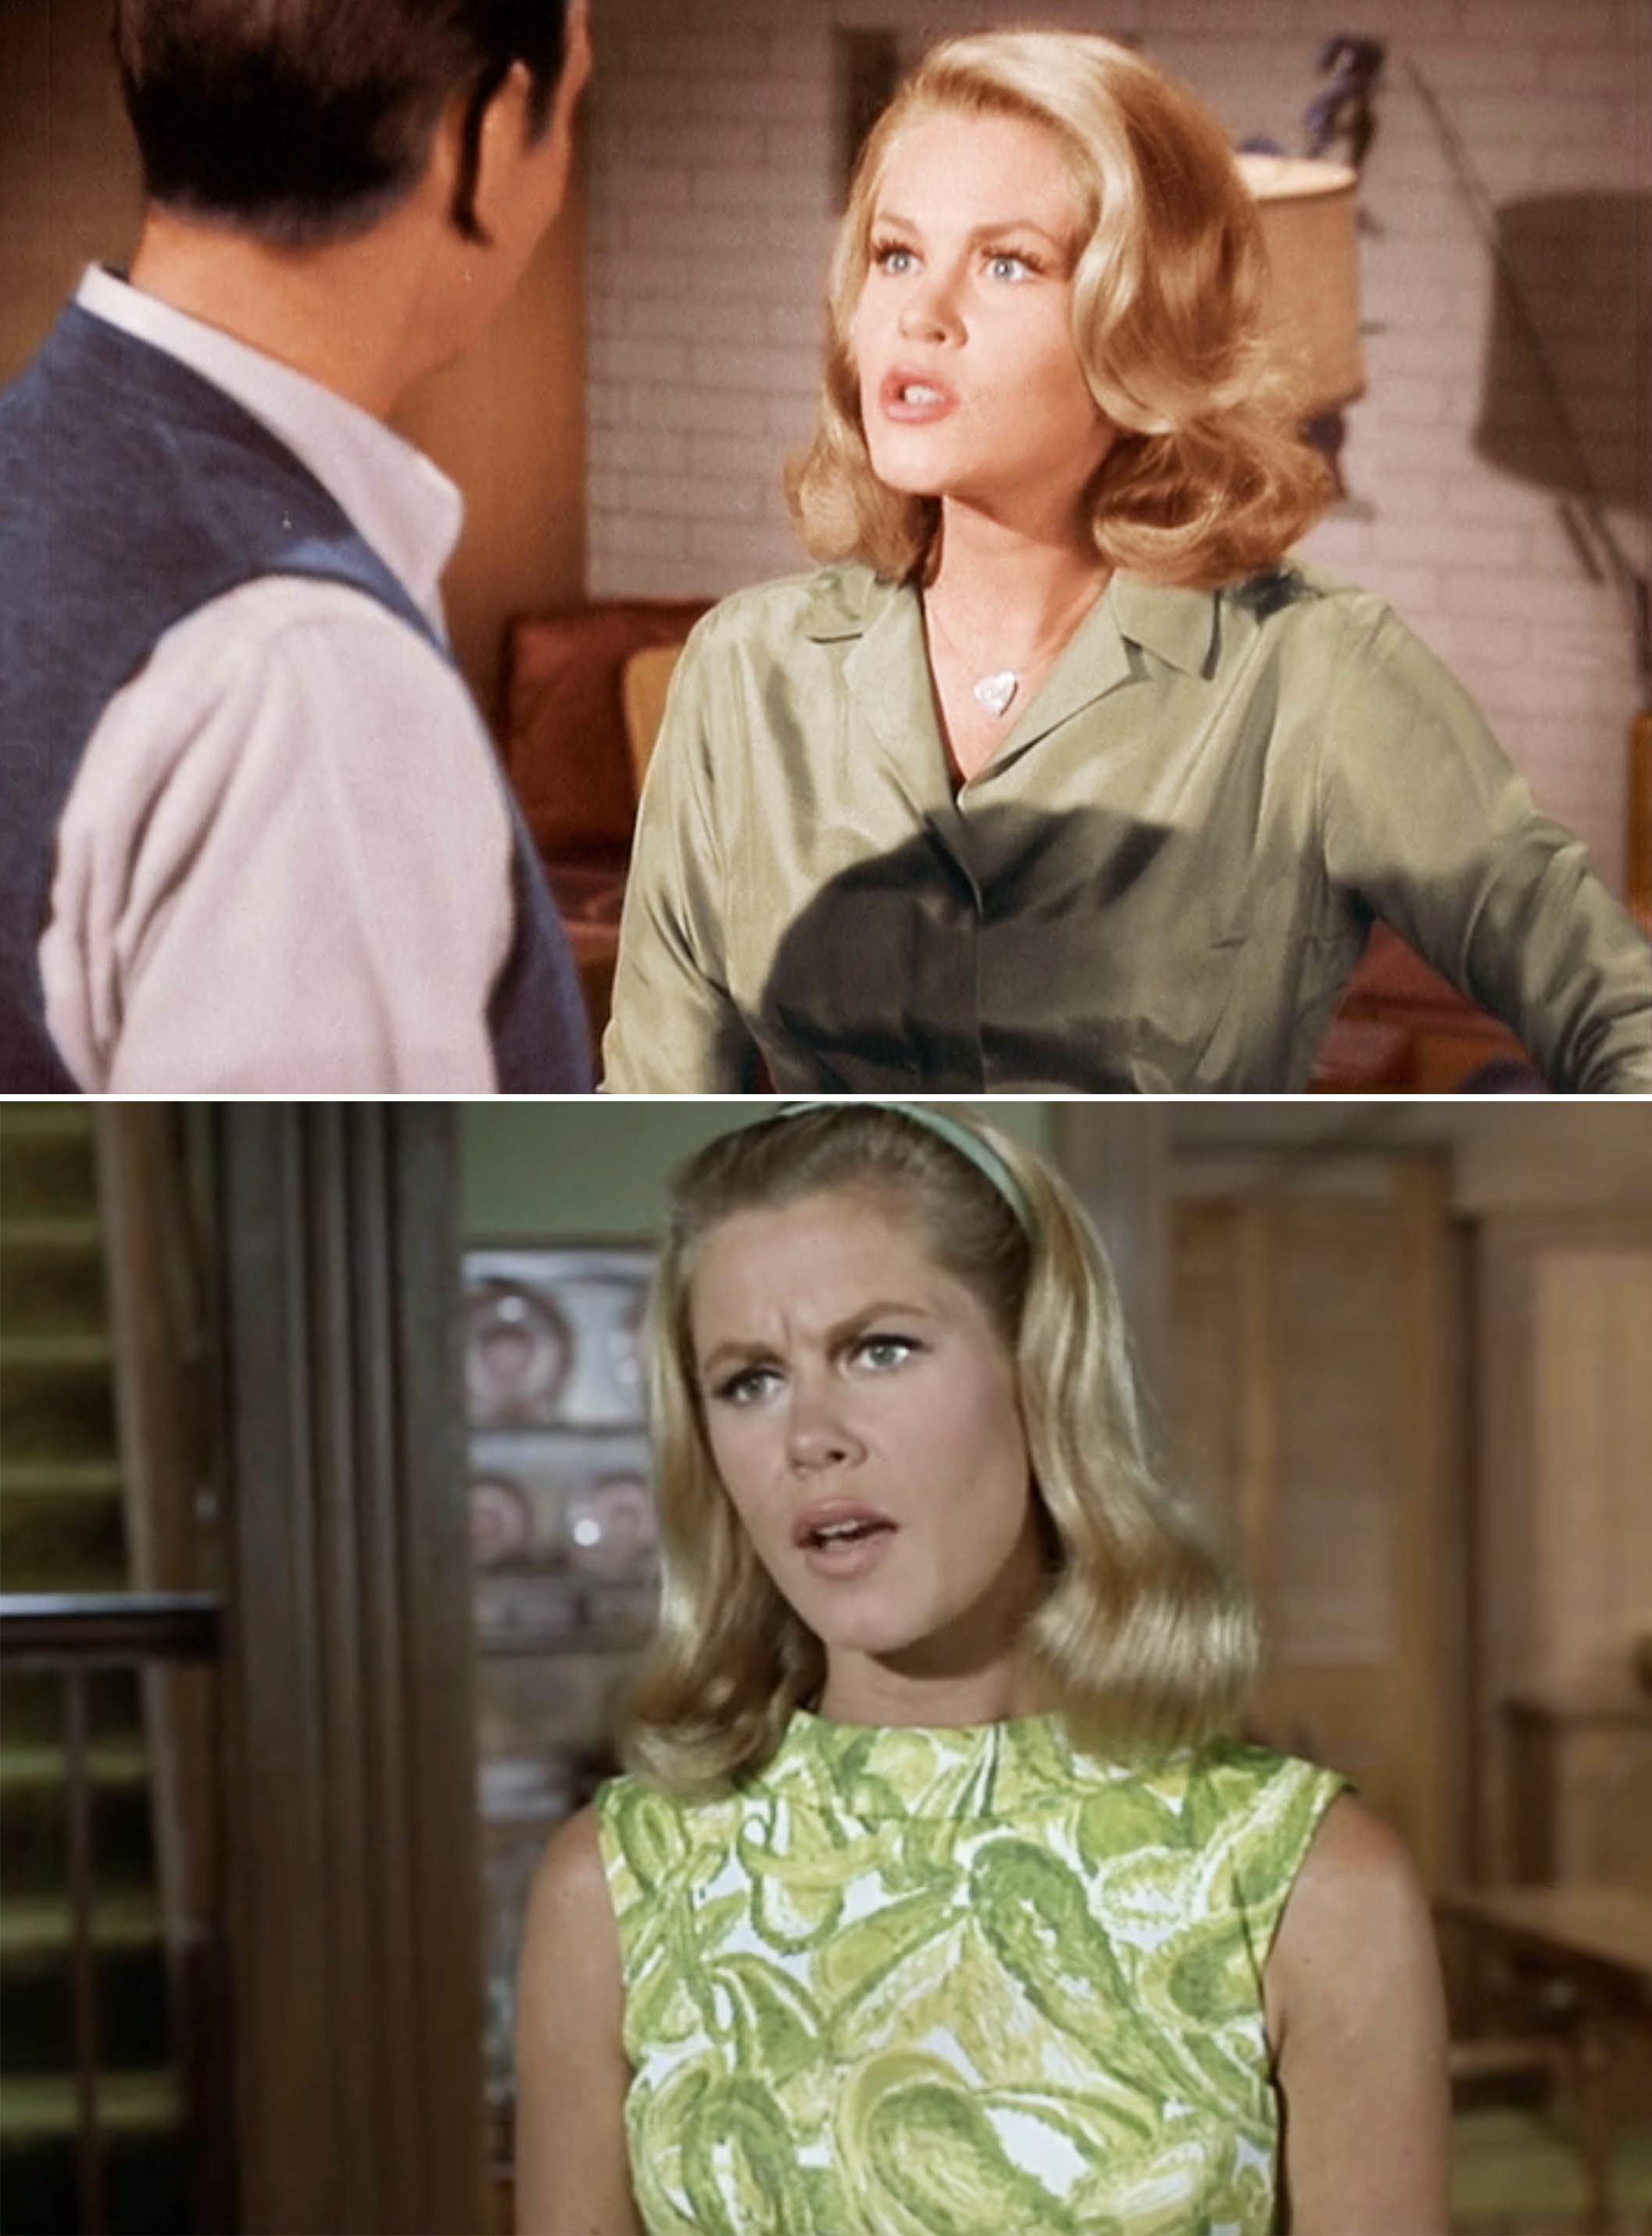 Two scenes featuring Elizabeth  as Samantha Stephens, wearing different outfits